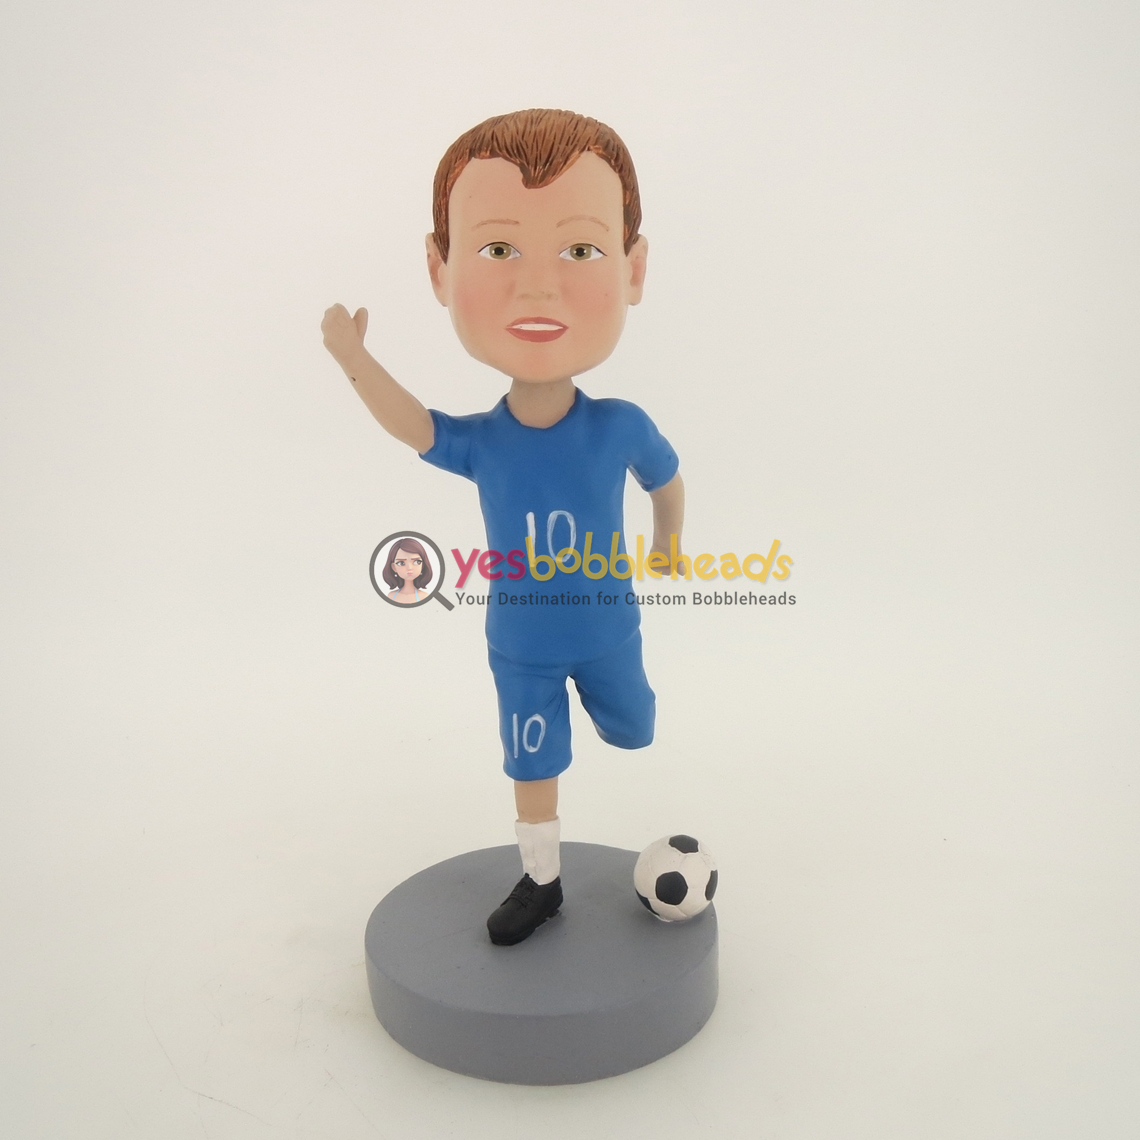 Picture of Custom Bobblehead Doll: Boy Playing Soccer